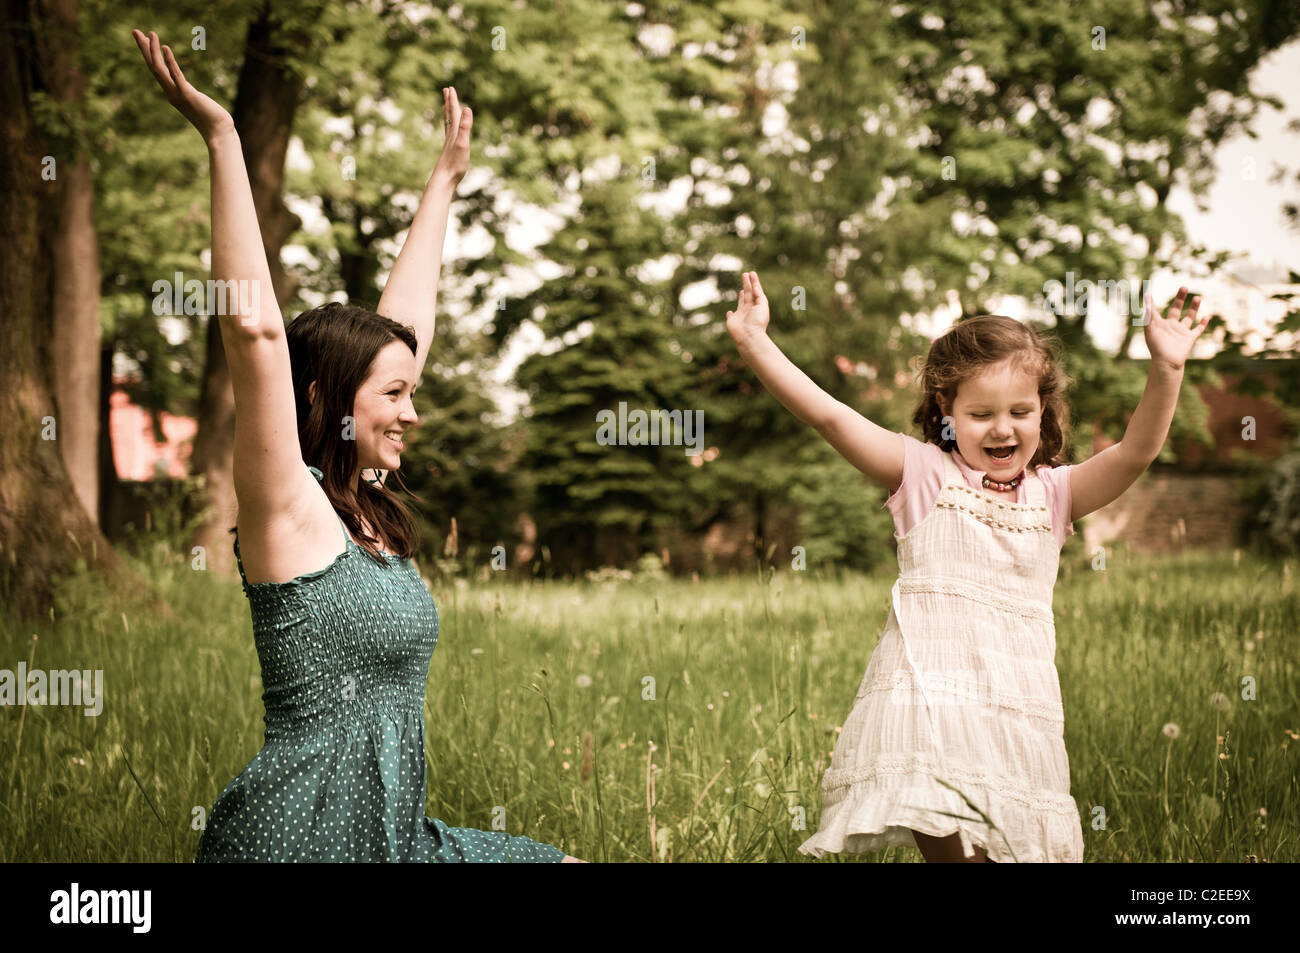 Small cute girl enjoying life with her mother outdoors in park Stock Photo